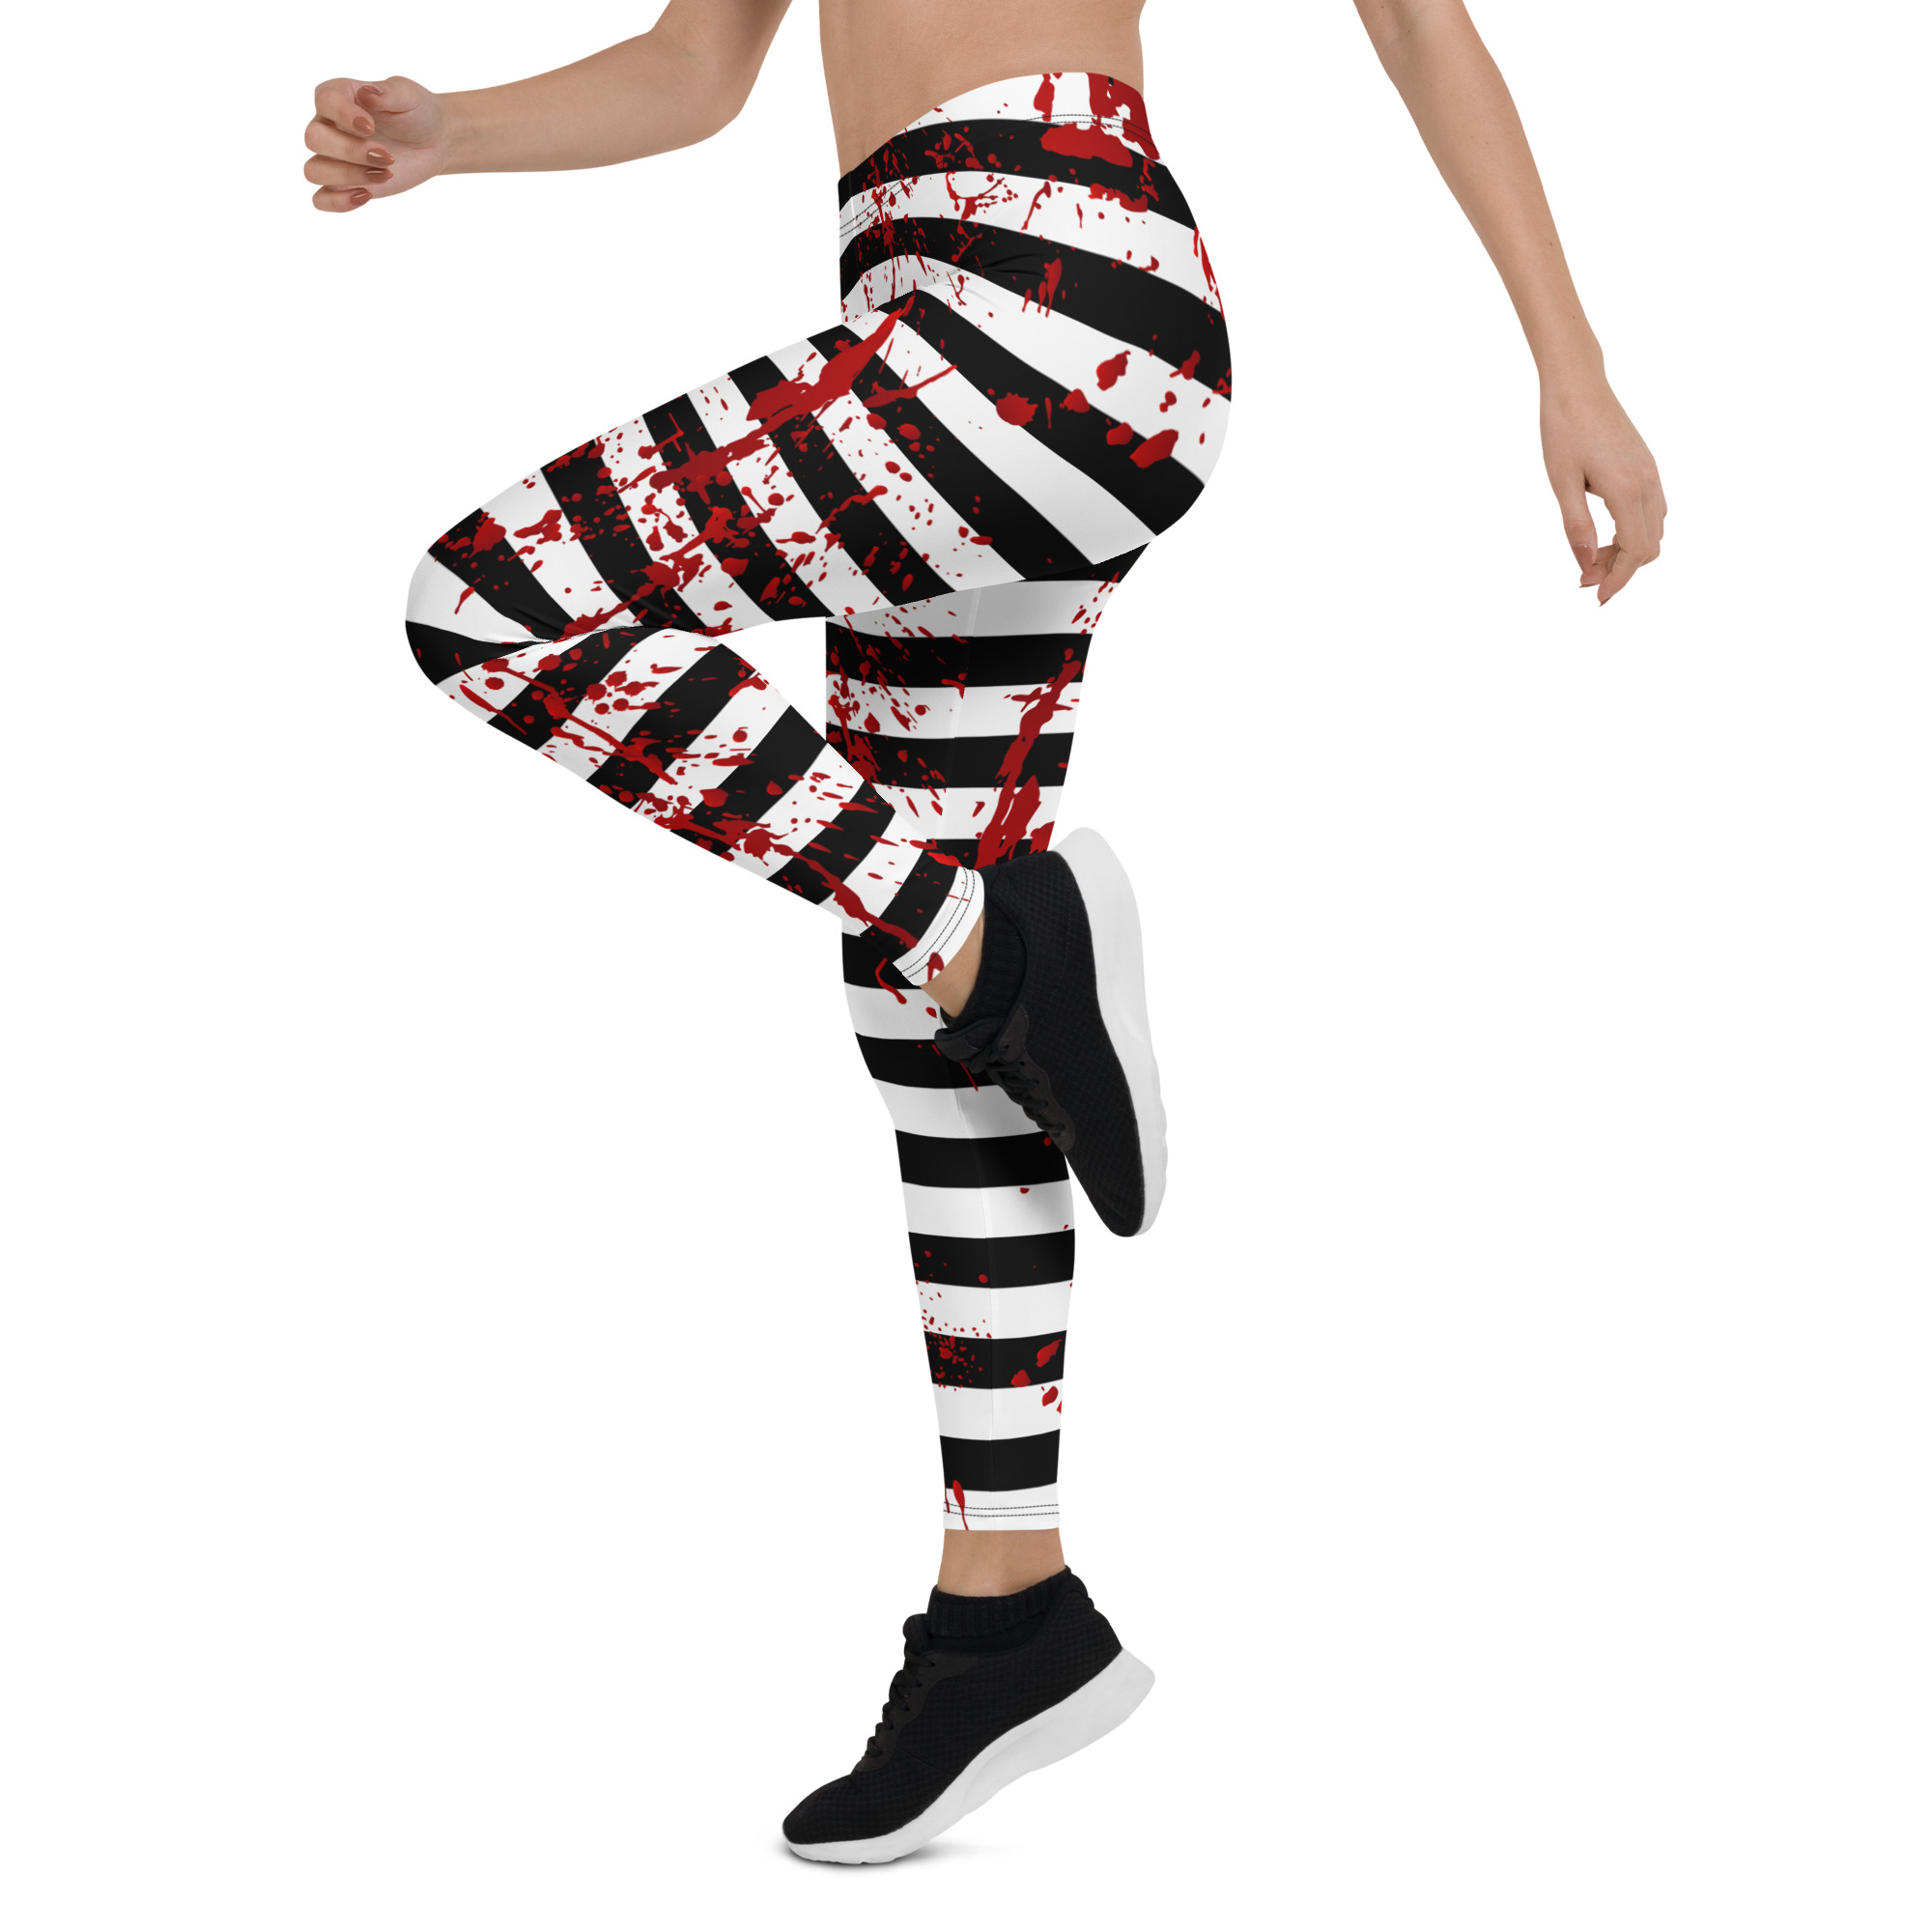 Bloody Halloween striped leggings – Halloween-themed striped leggings with  a blood-spray design ID09 - AIW Art Gifts